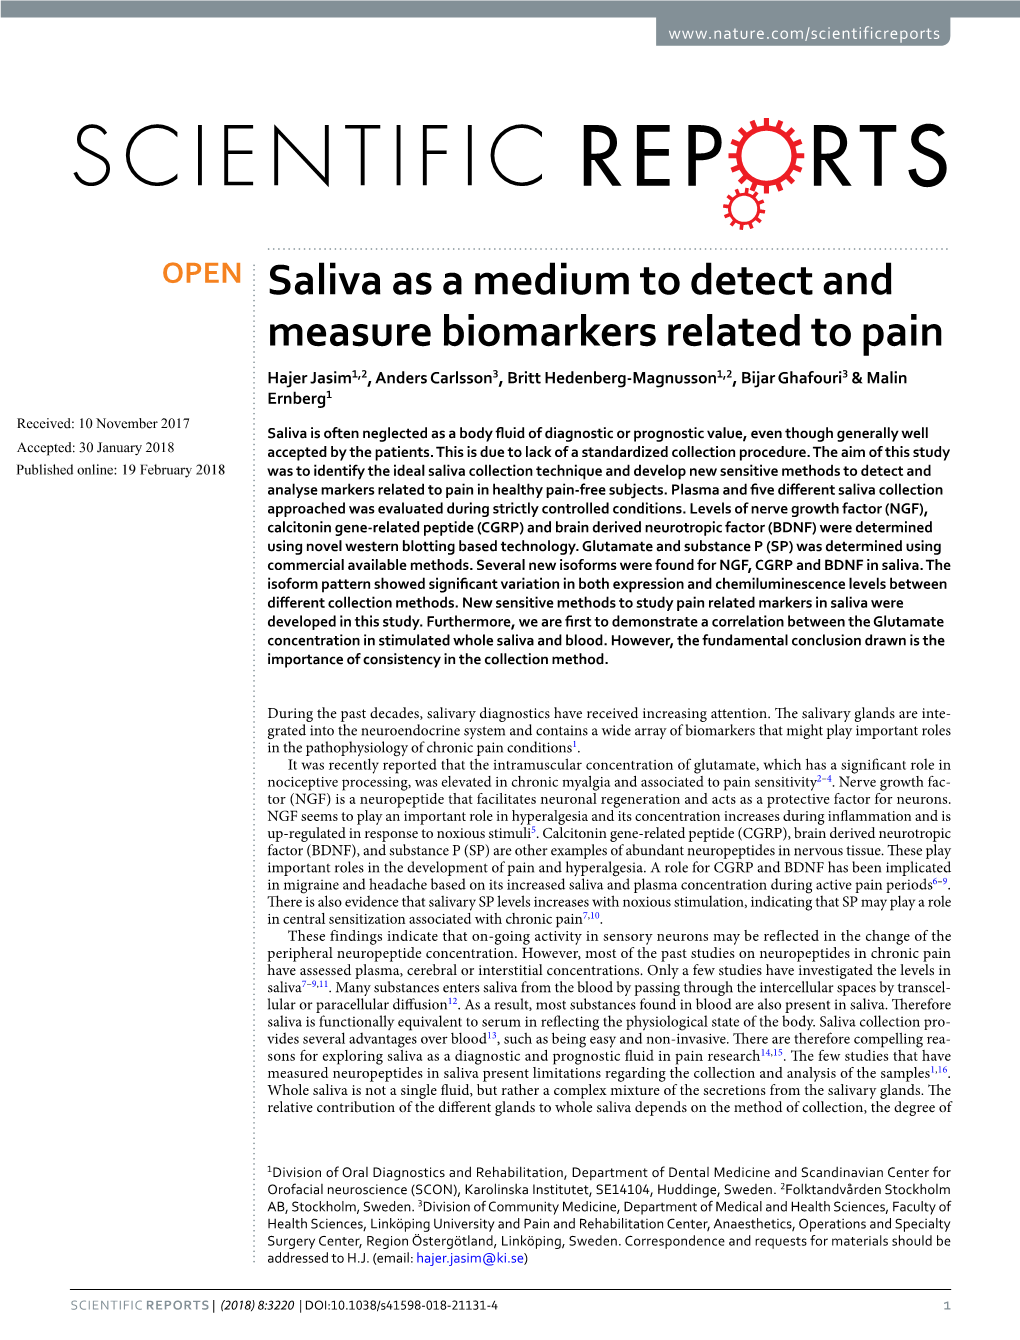 Saliva As a Medium to Detect and Measure Biomarkers Related to Pain